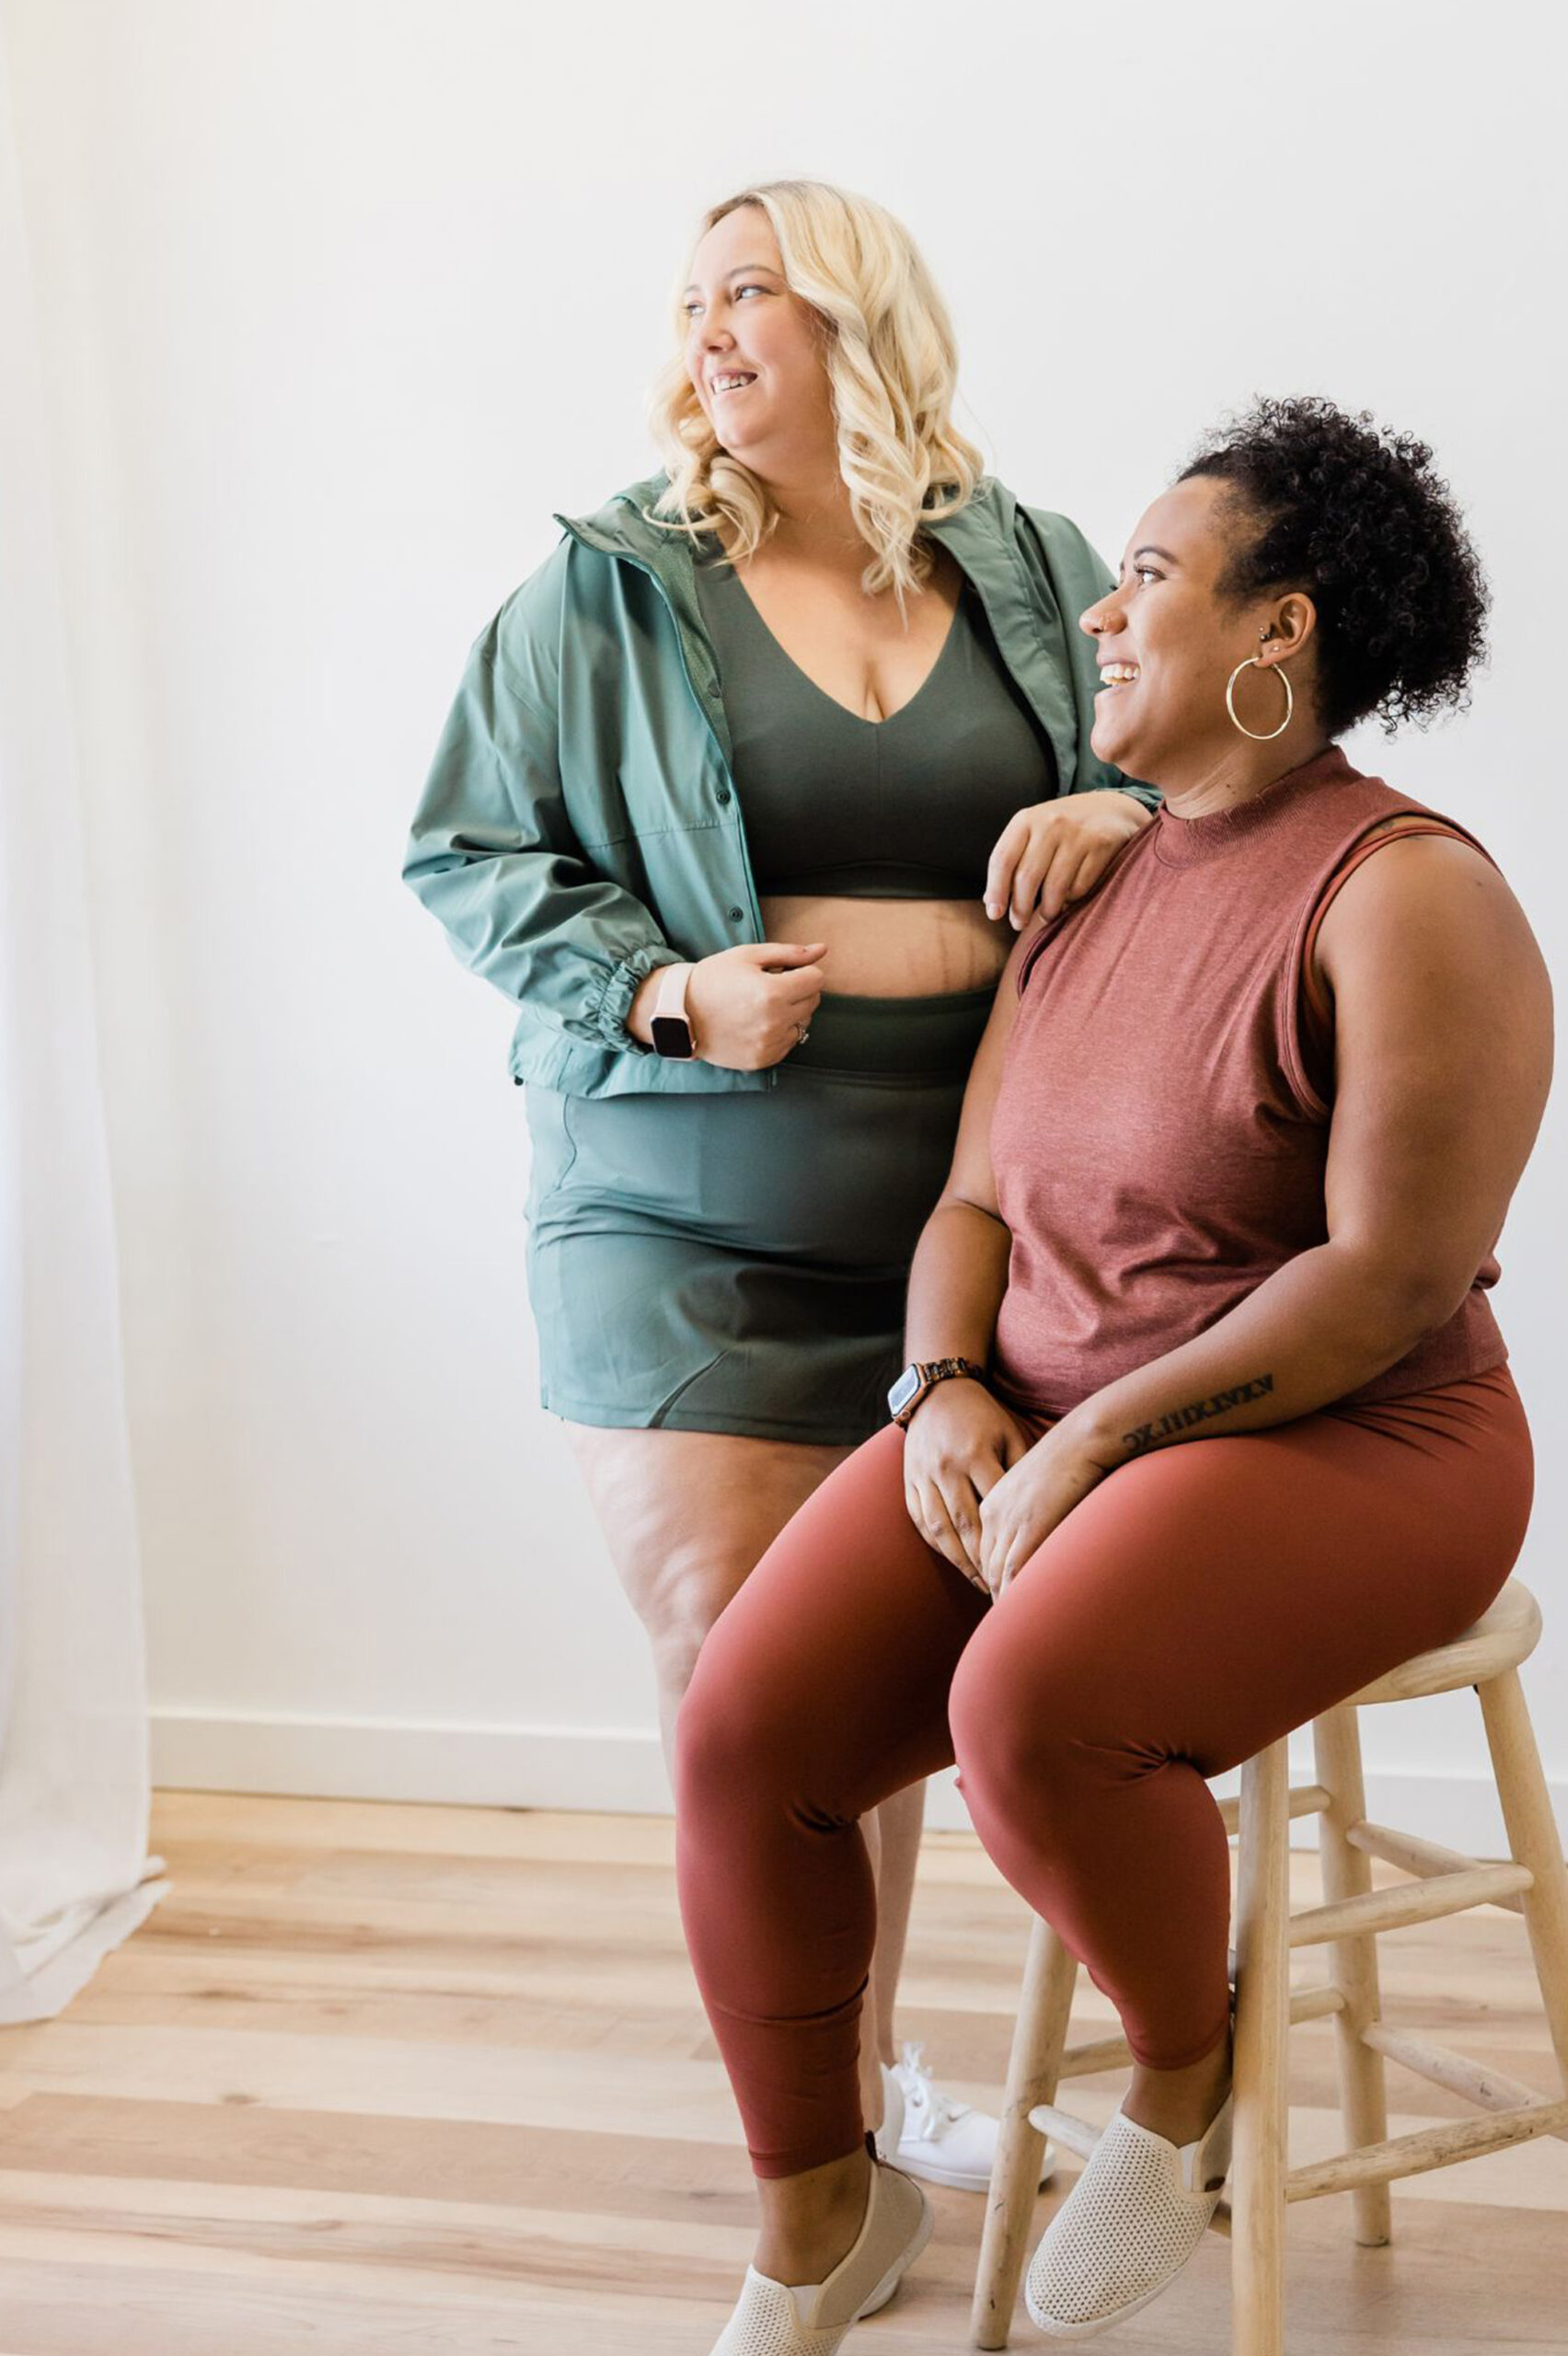 How to Become a Plus Size Model